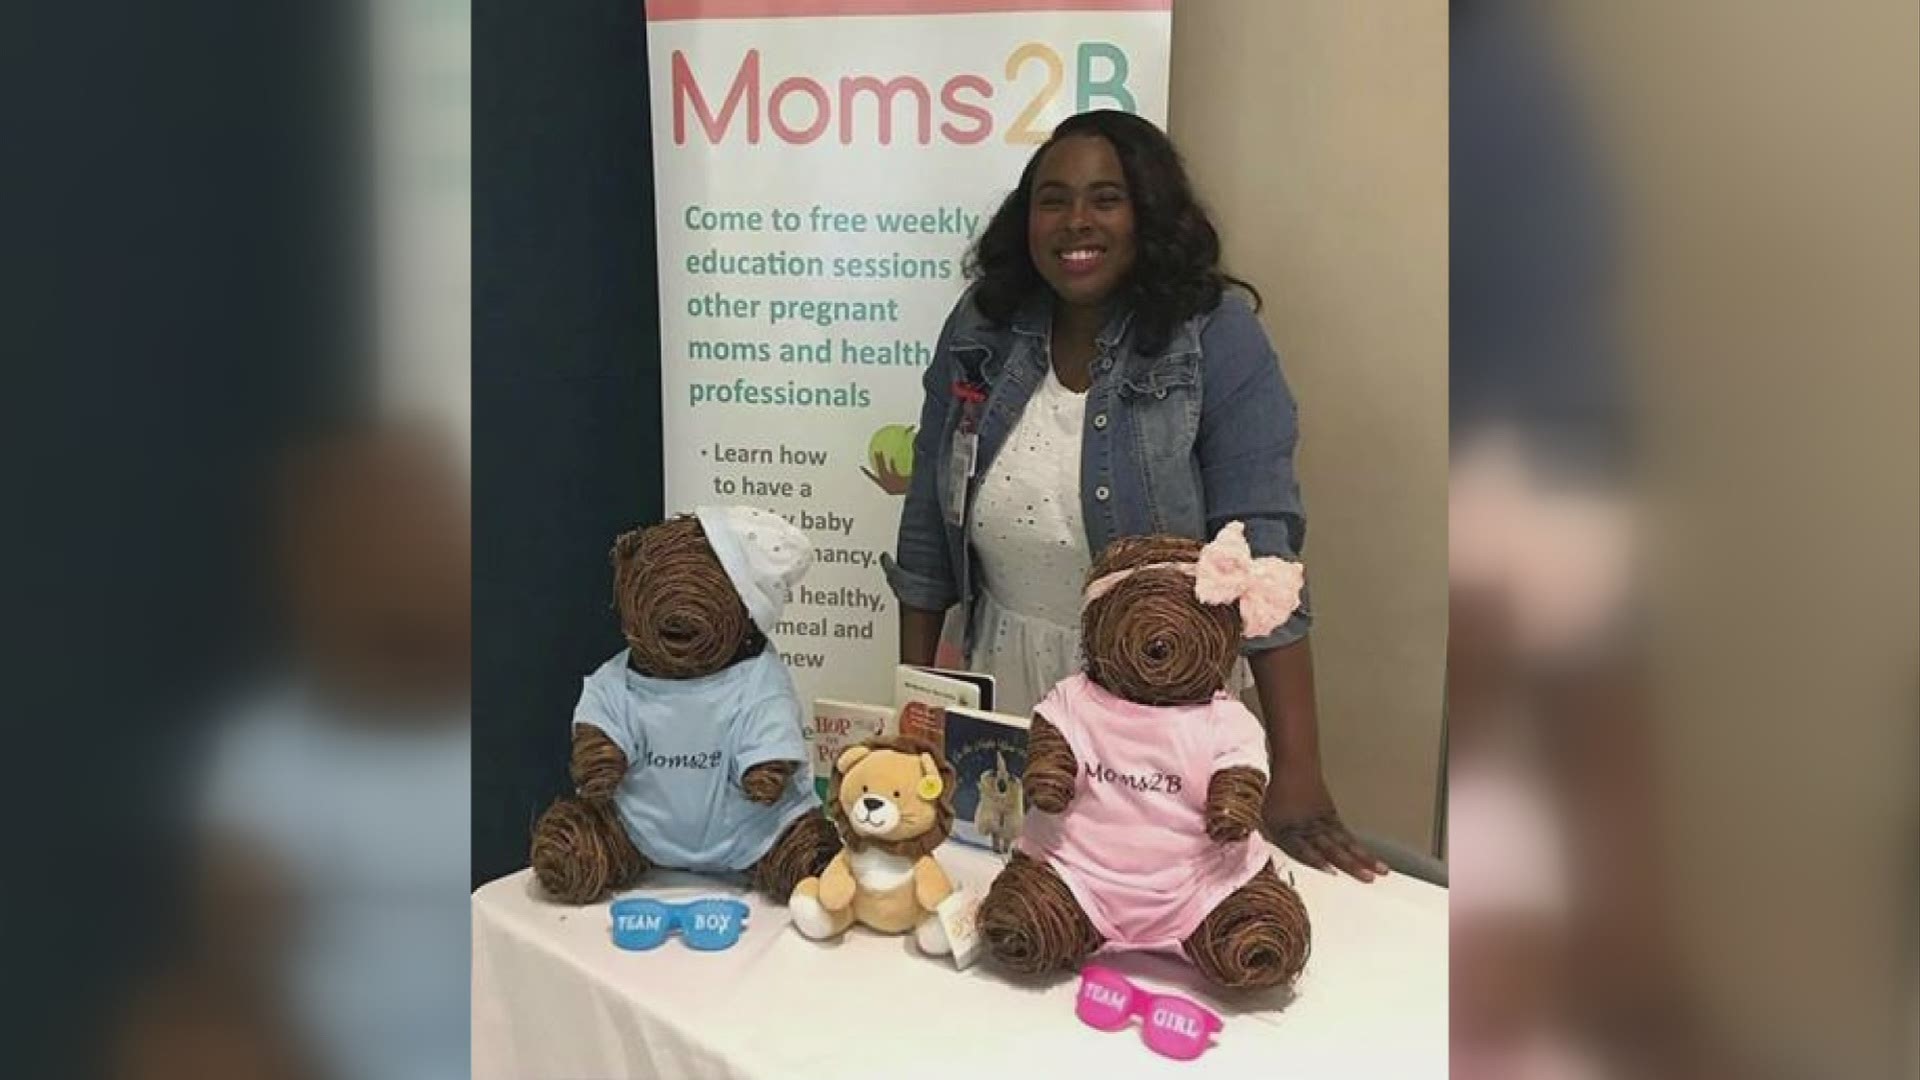 Moms To Be started as a program to help address infant mortality.